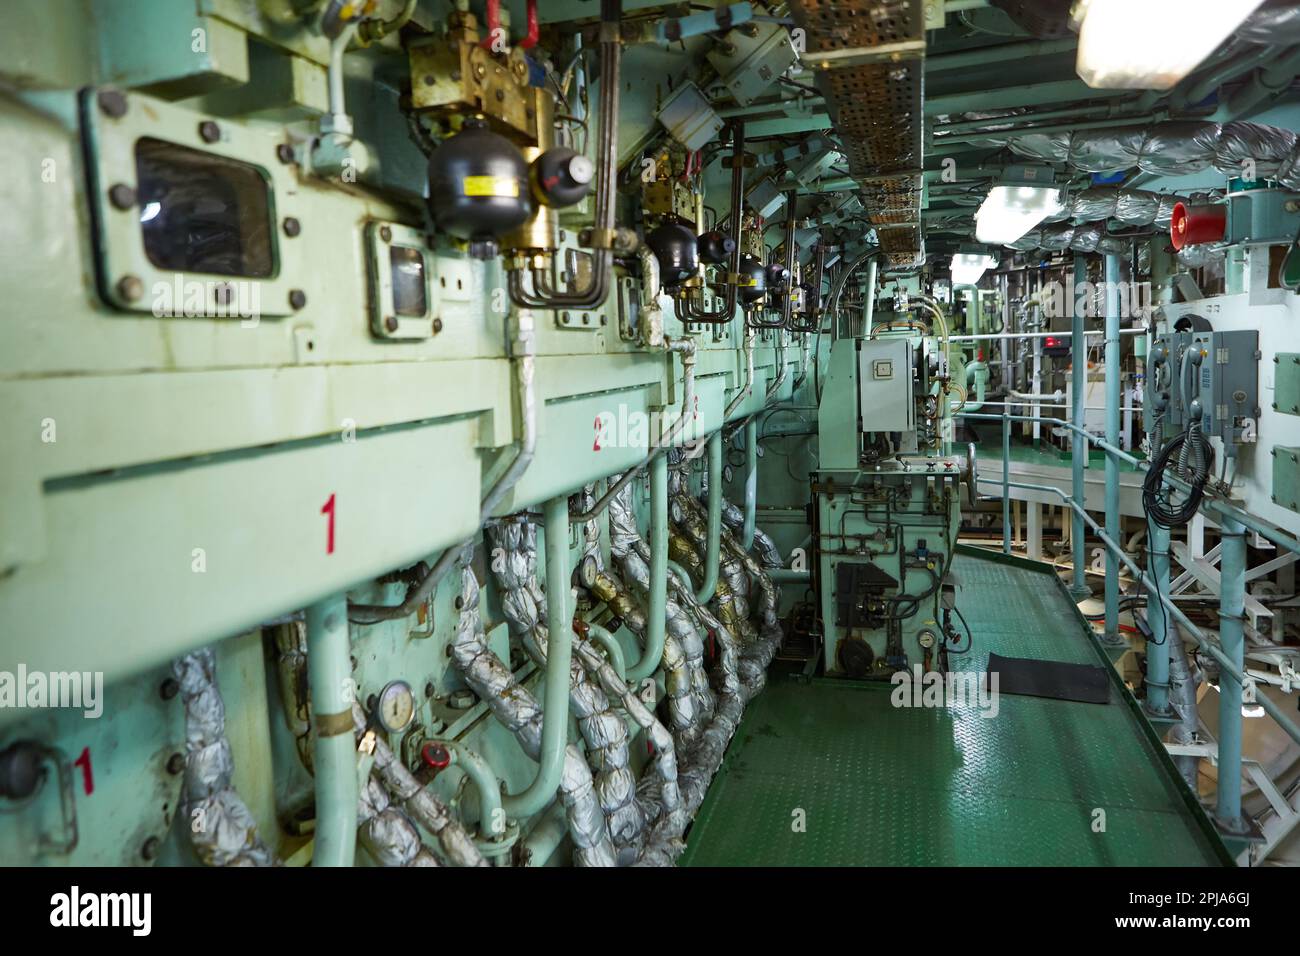 Ship's engine room. Vessel's ( Ship ) Engine Room Space / industrial stairs. Ship's Engine Heavy Machinery Space - Pipes, Valves, Engines Stock Photo